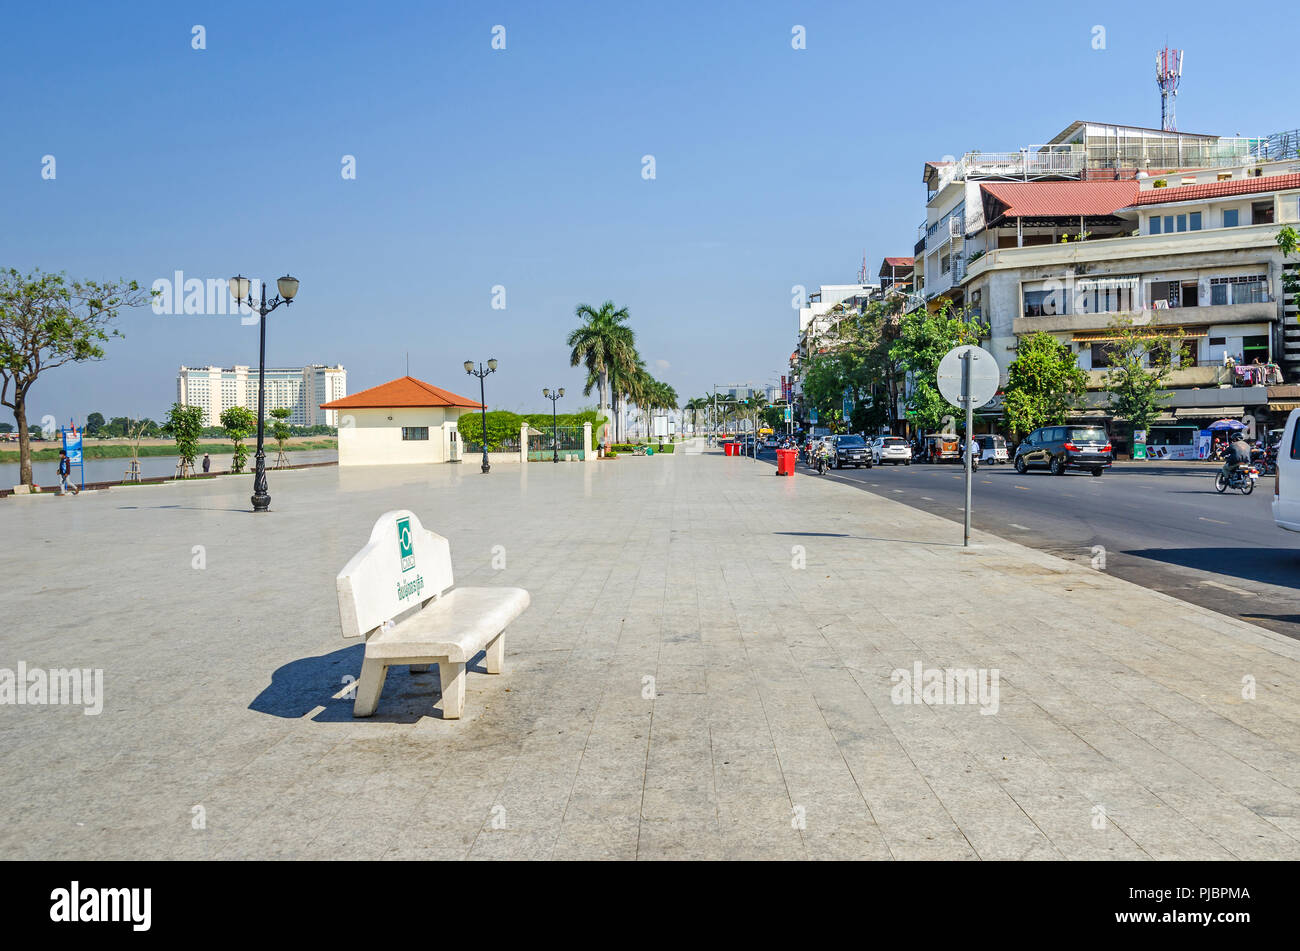 Phnom Penh, Cambodia - April 9, 2018: Preah Sisowath Quay, a riverside public promenade on the bank of the Tonle Sap River with its  large, long open  Stock Photo